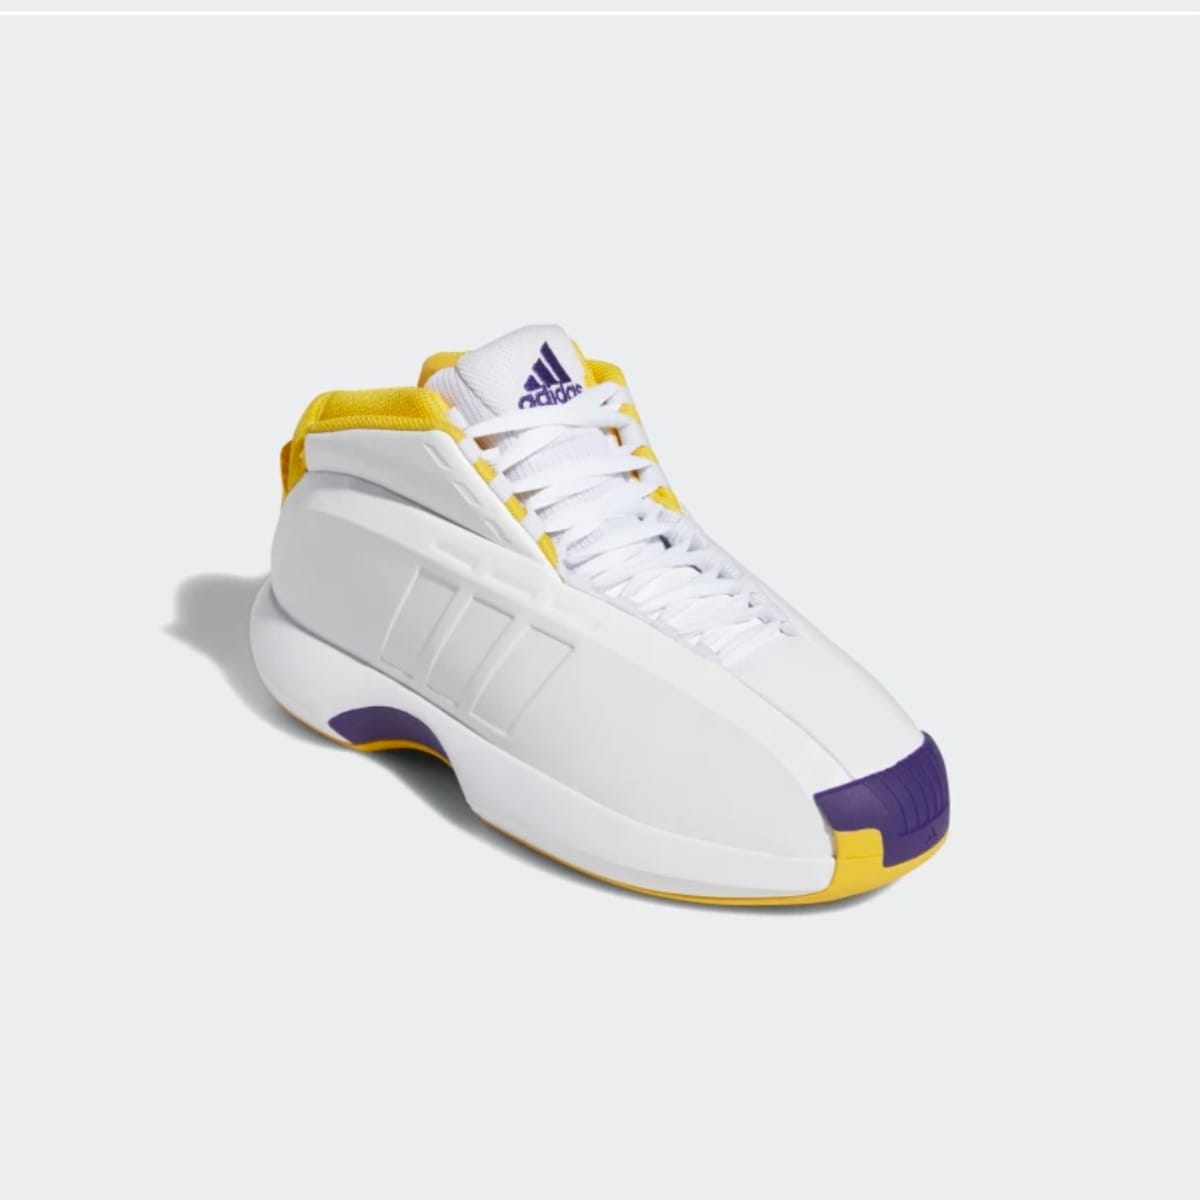 Adidas Crazy 1 'Lakers' Release Information - Sports Illustrated FanNation News, and More